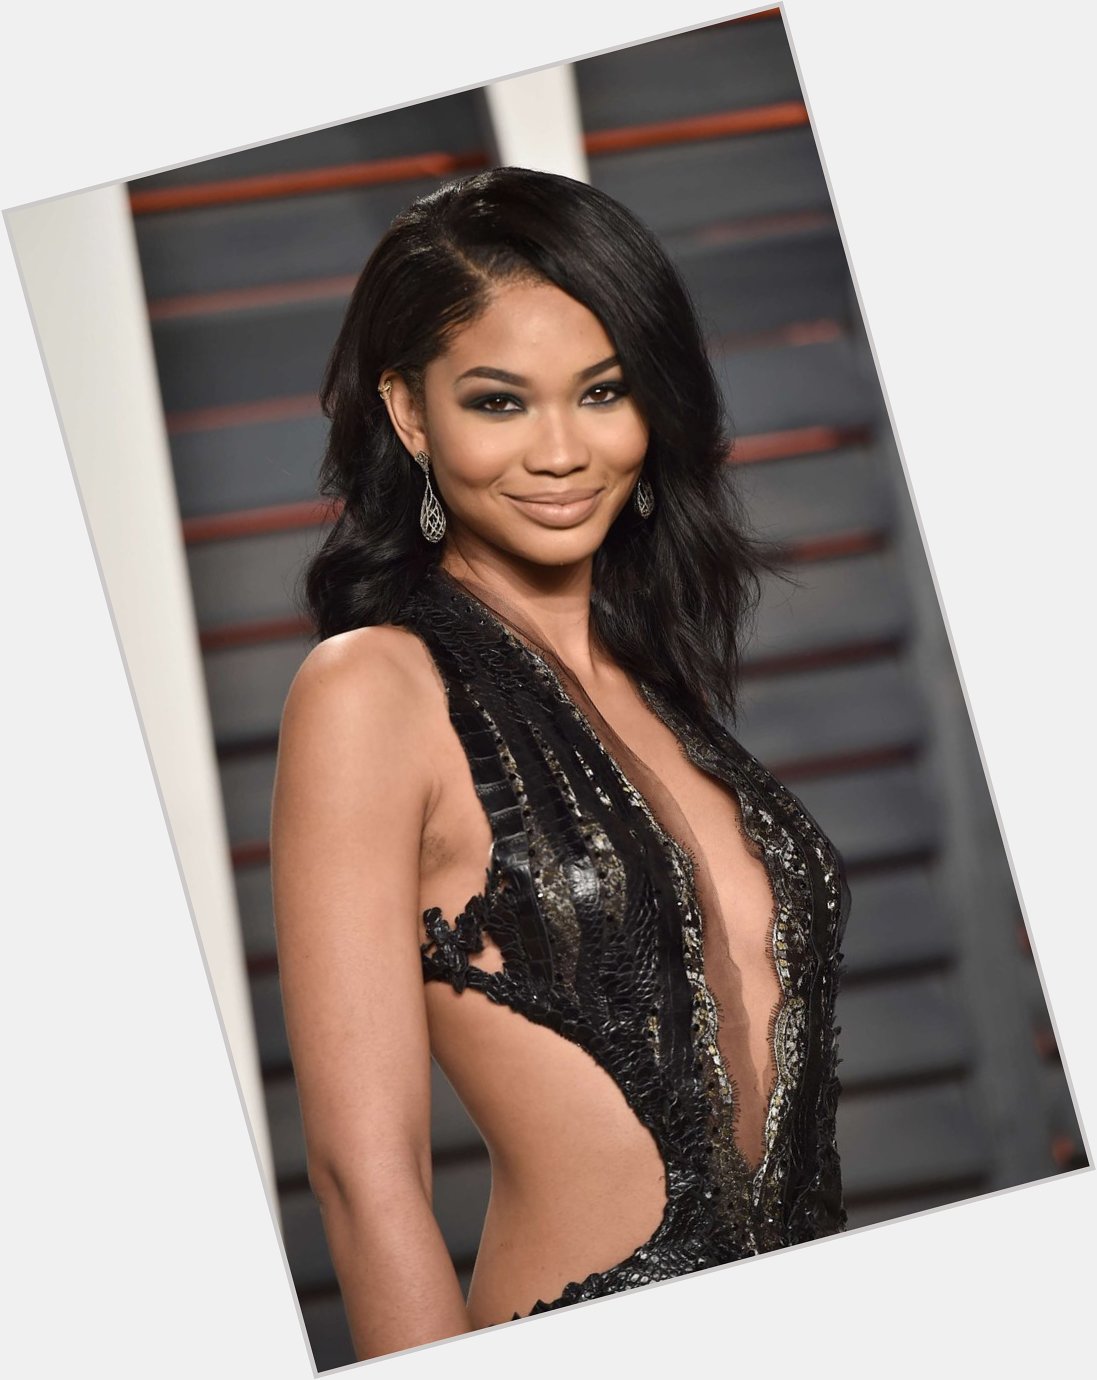 Happy Birthday to the stunning Chanel Iman. The gorgeous model turns 27 today! 